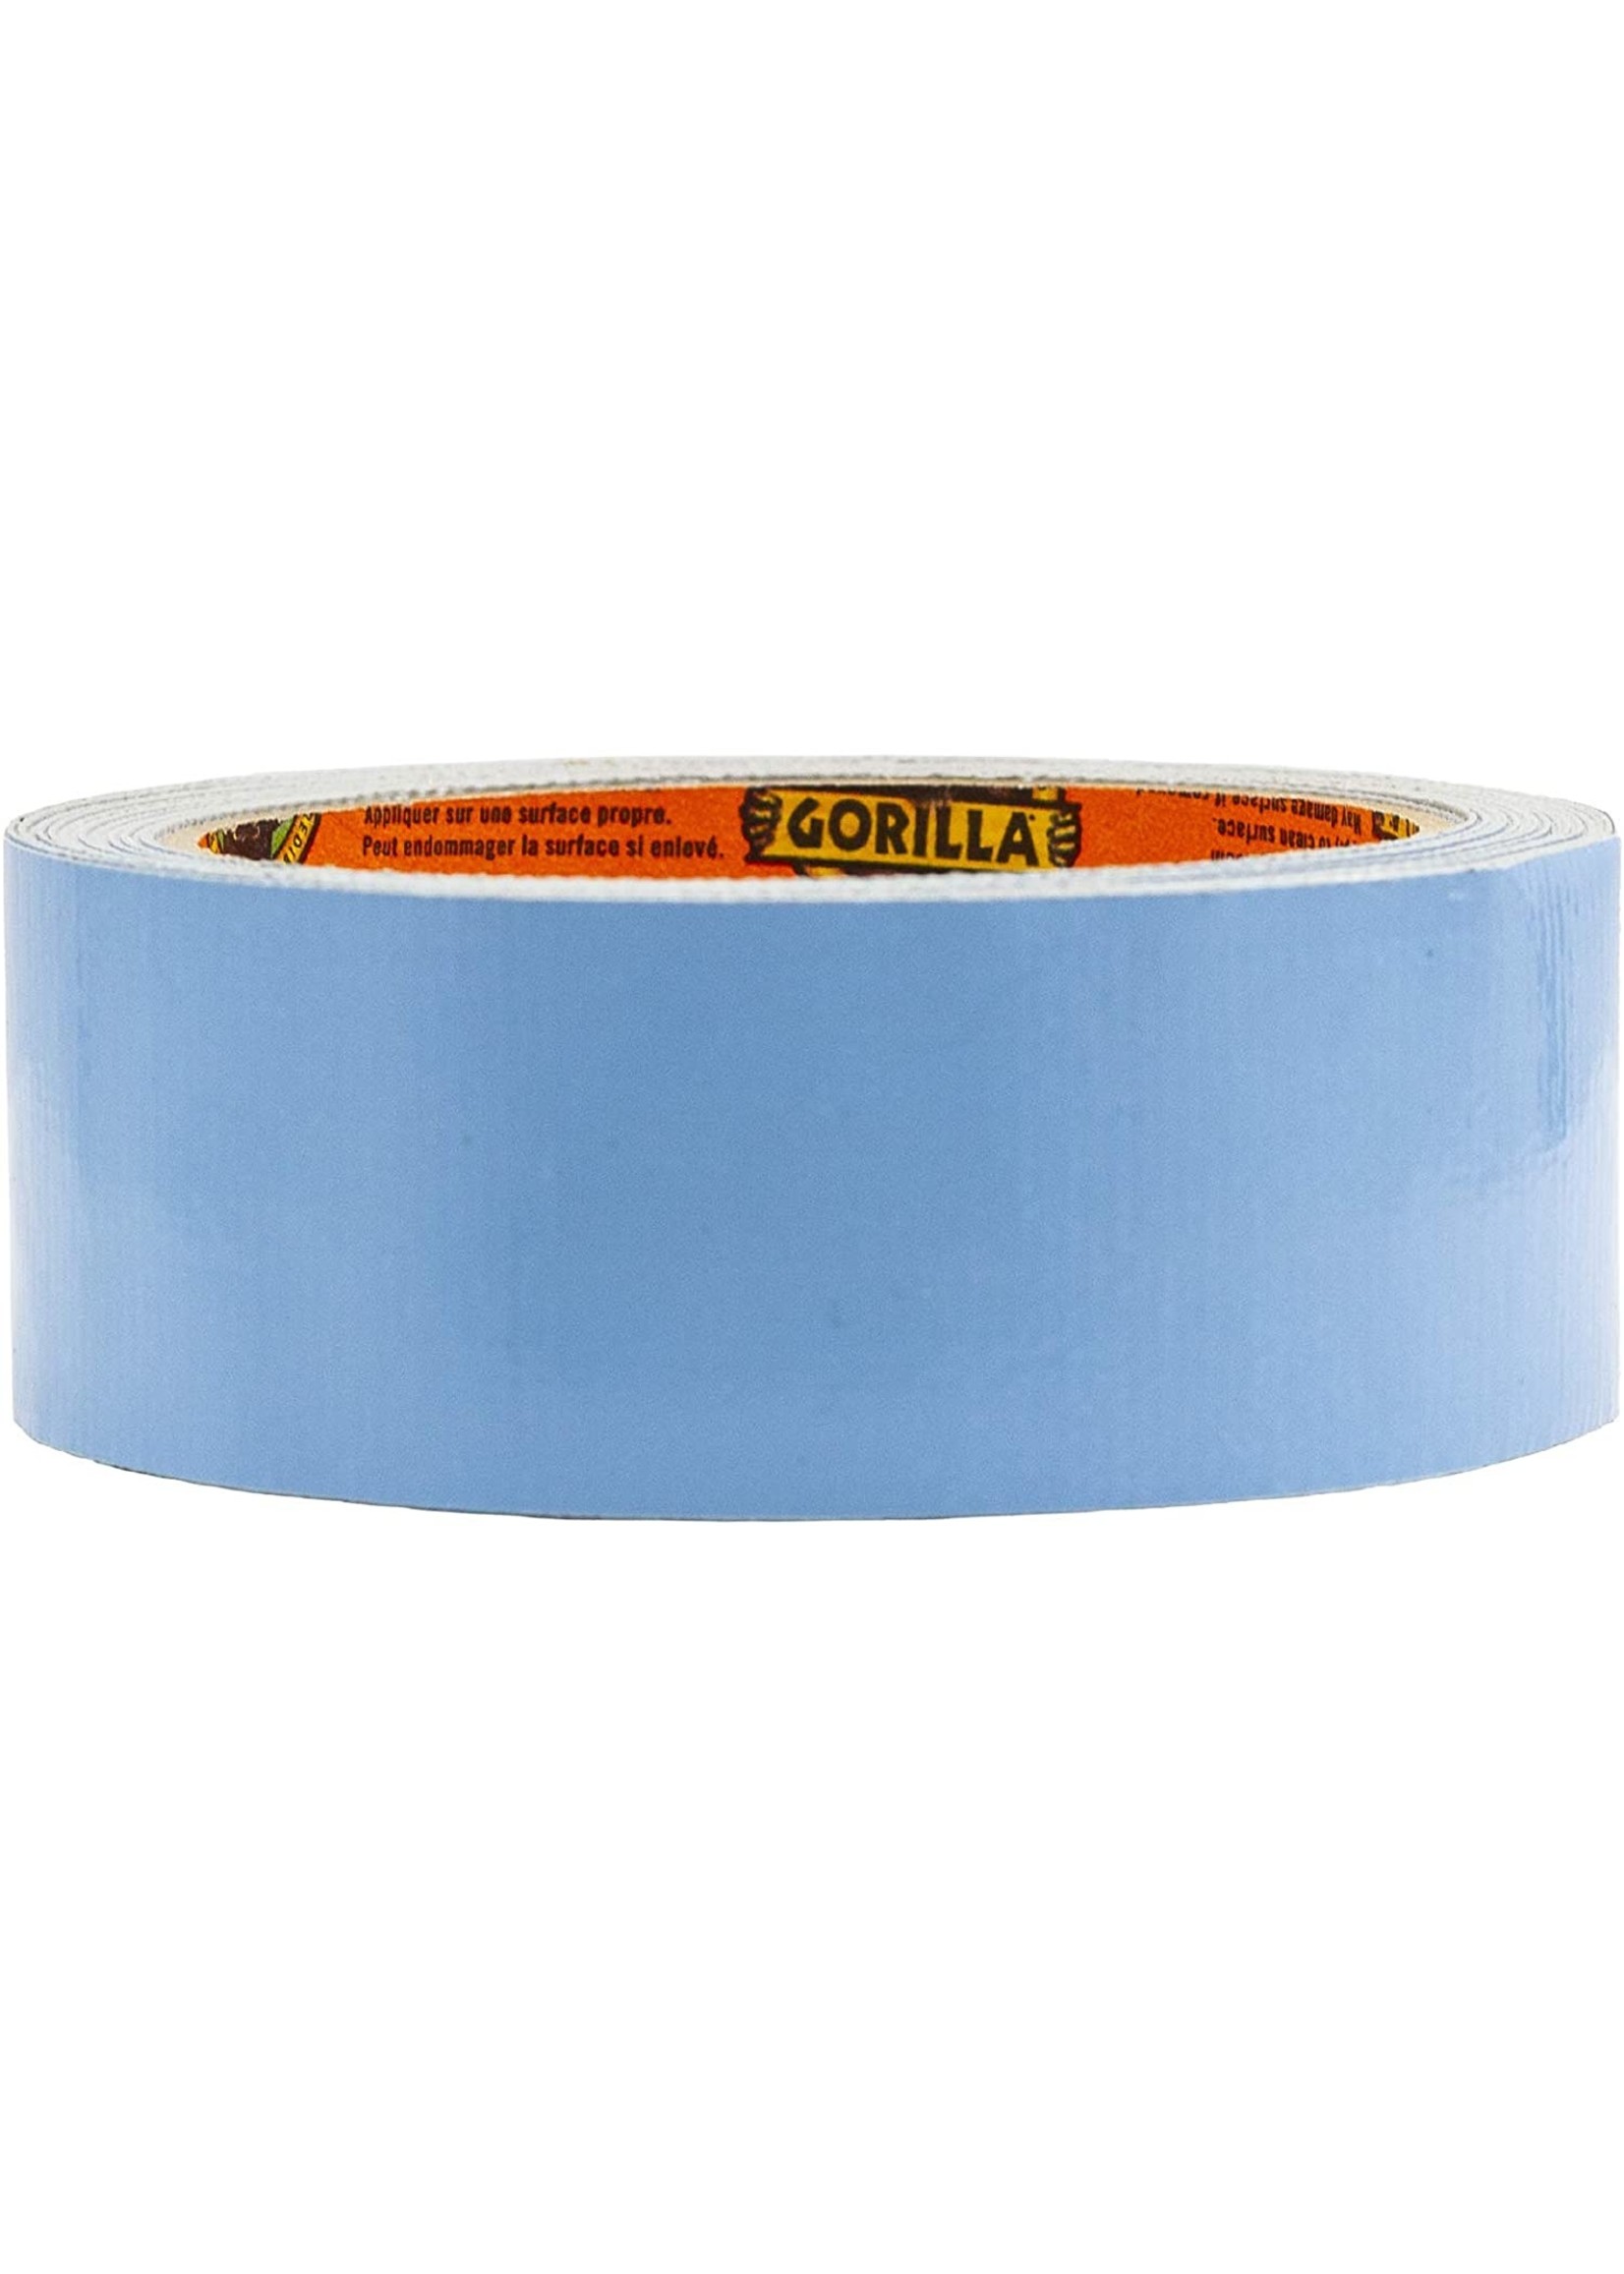 The Gorilla Glue Company Double-sided Tape